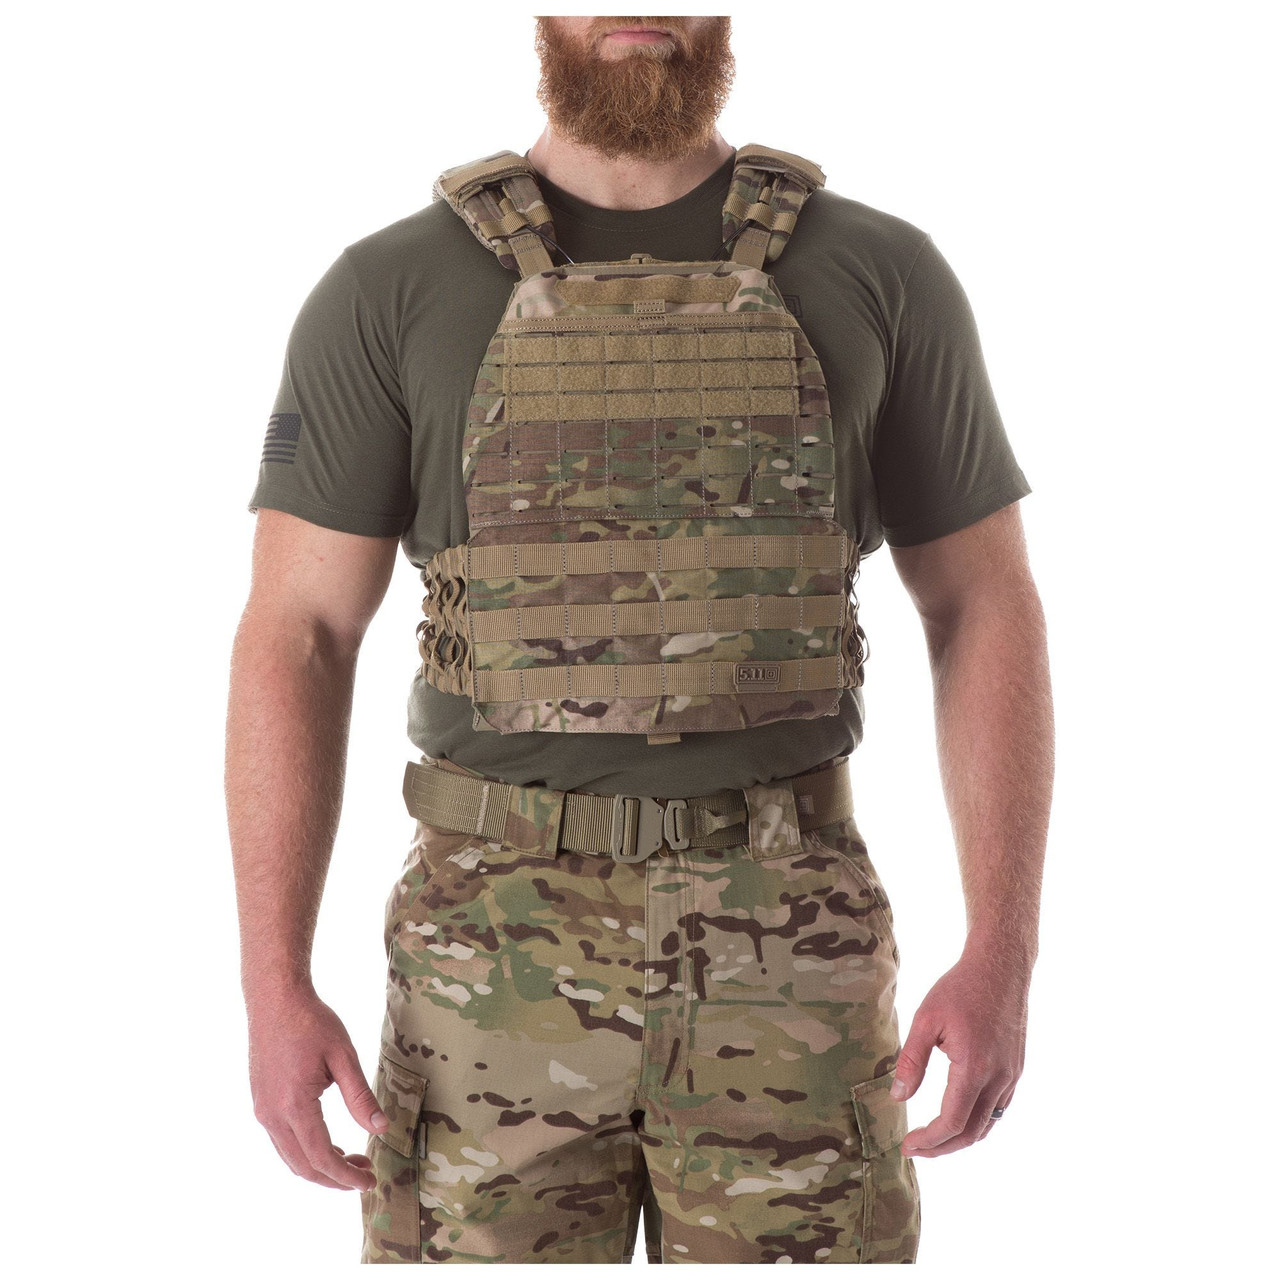 Tactec Plate Carrier - Coyote